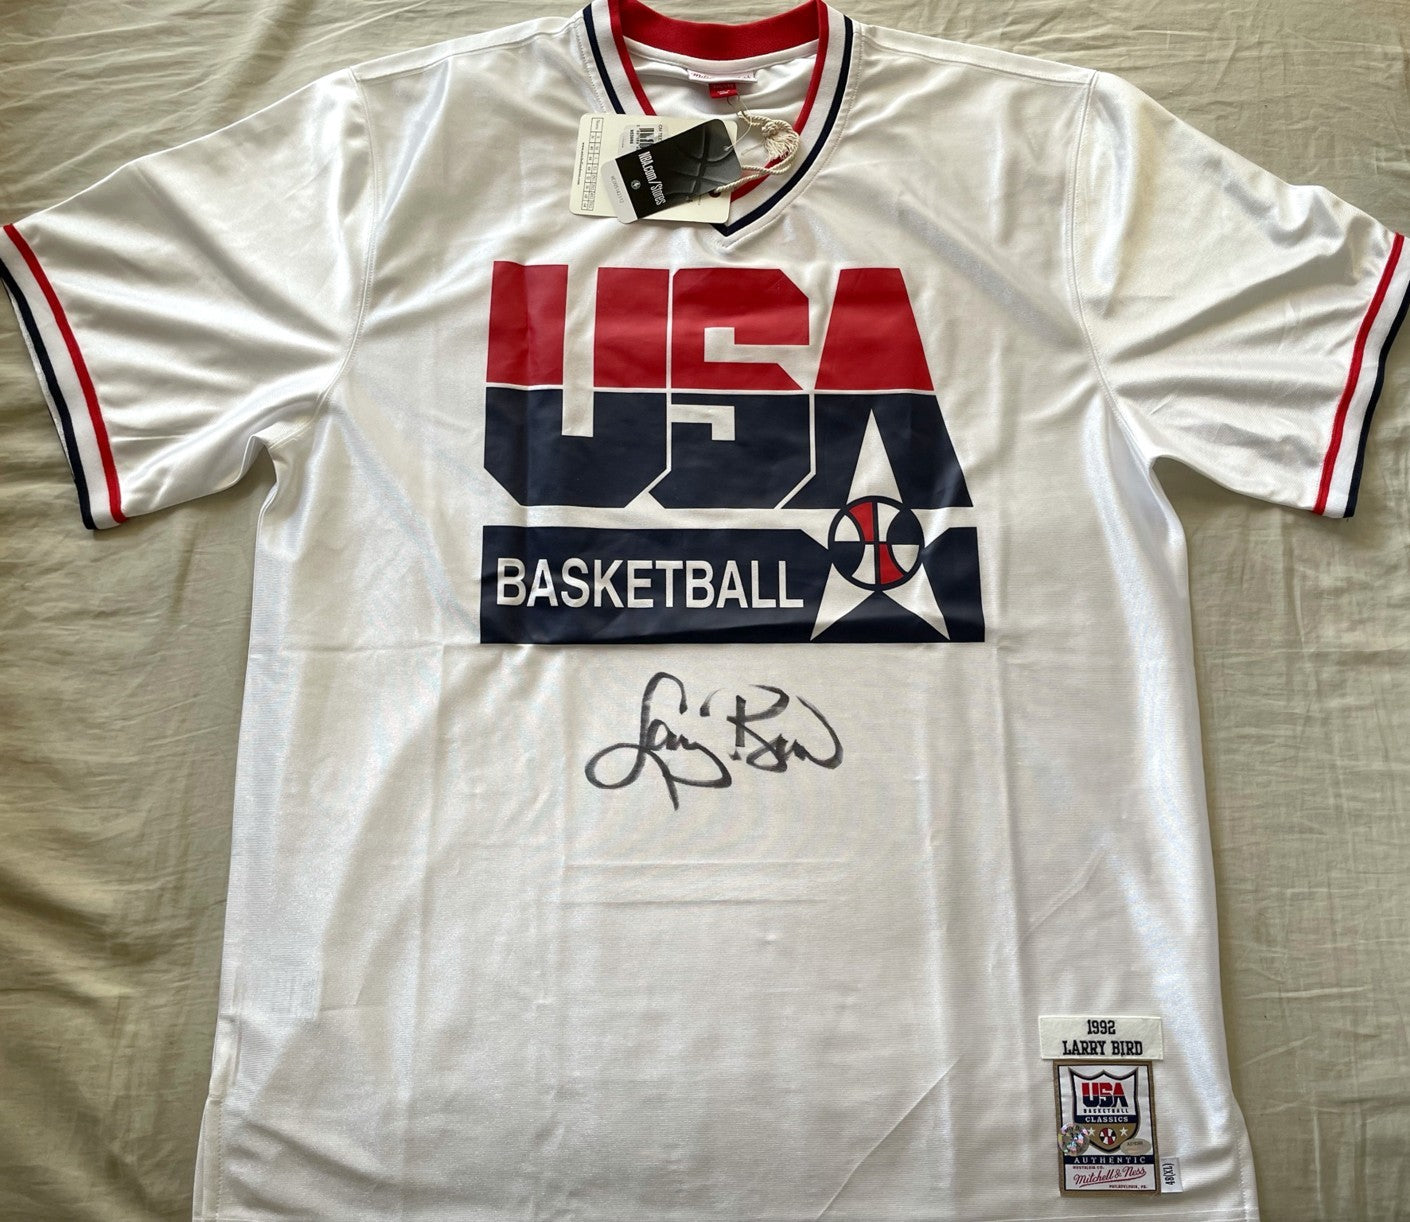 Larry Bird autographed 1992 USA Dream Team Mitchell and Ness warmup jersey or shooting shirt (Schwartz)